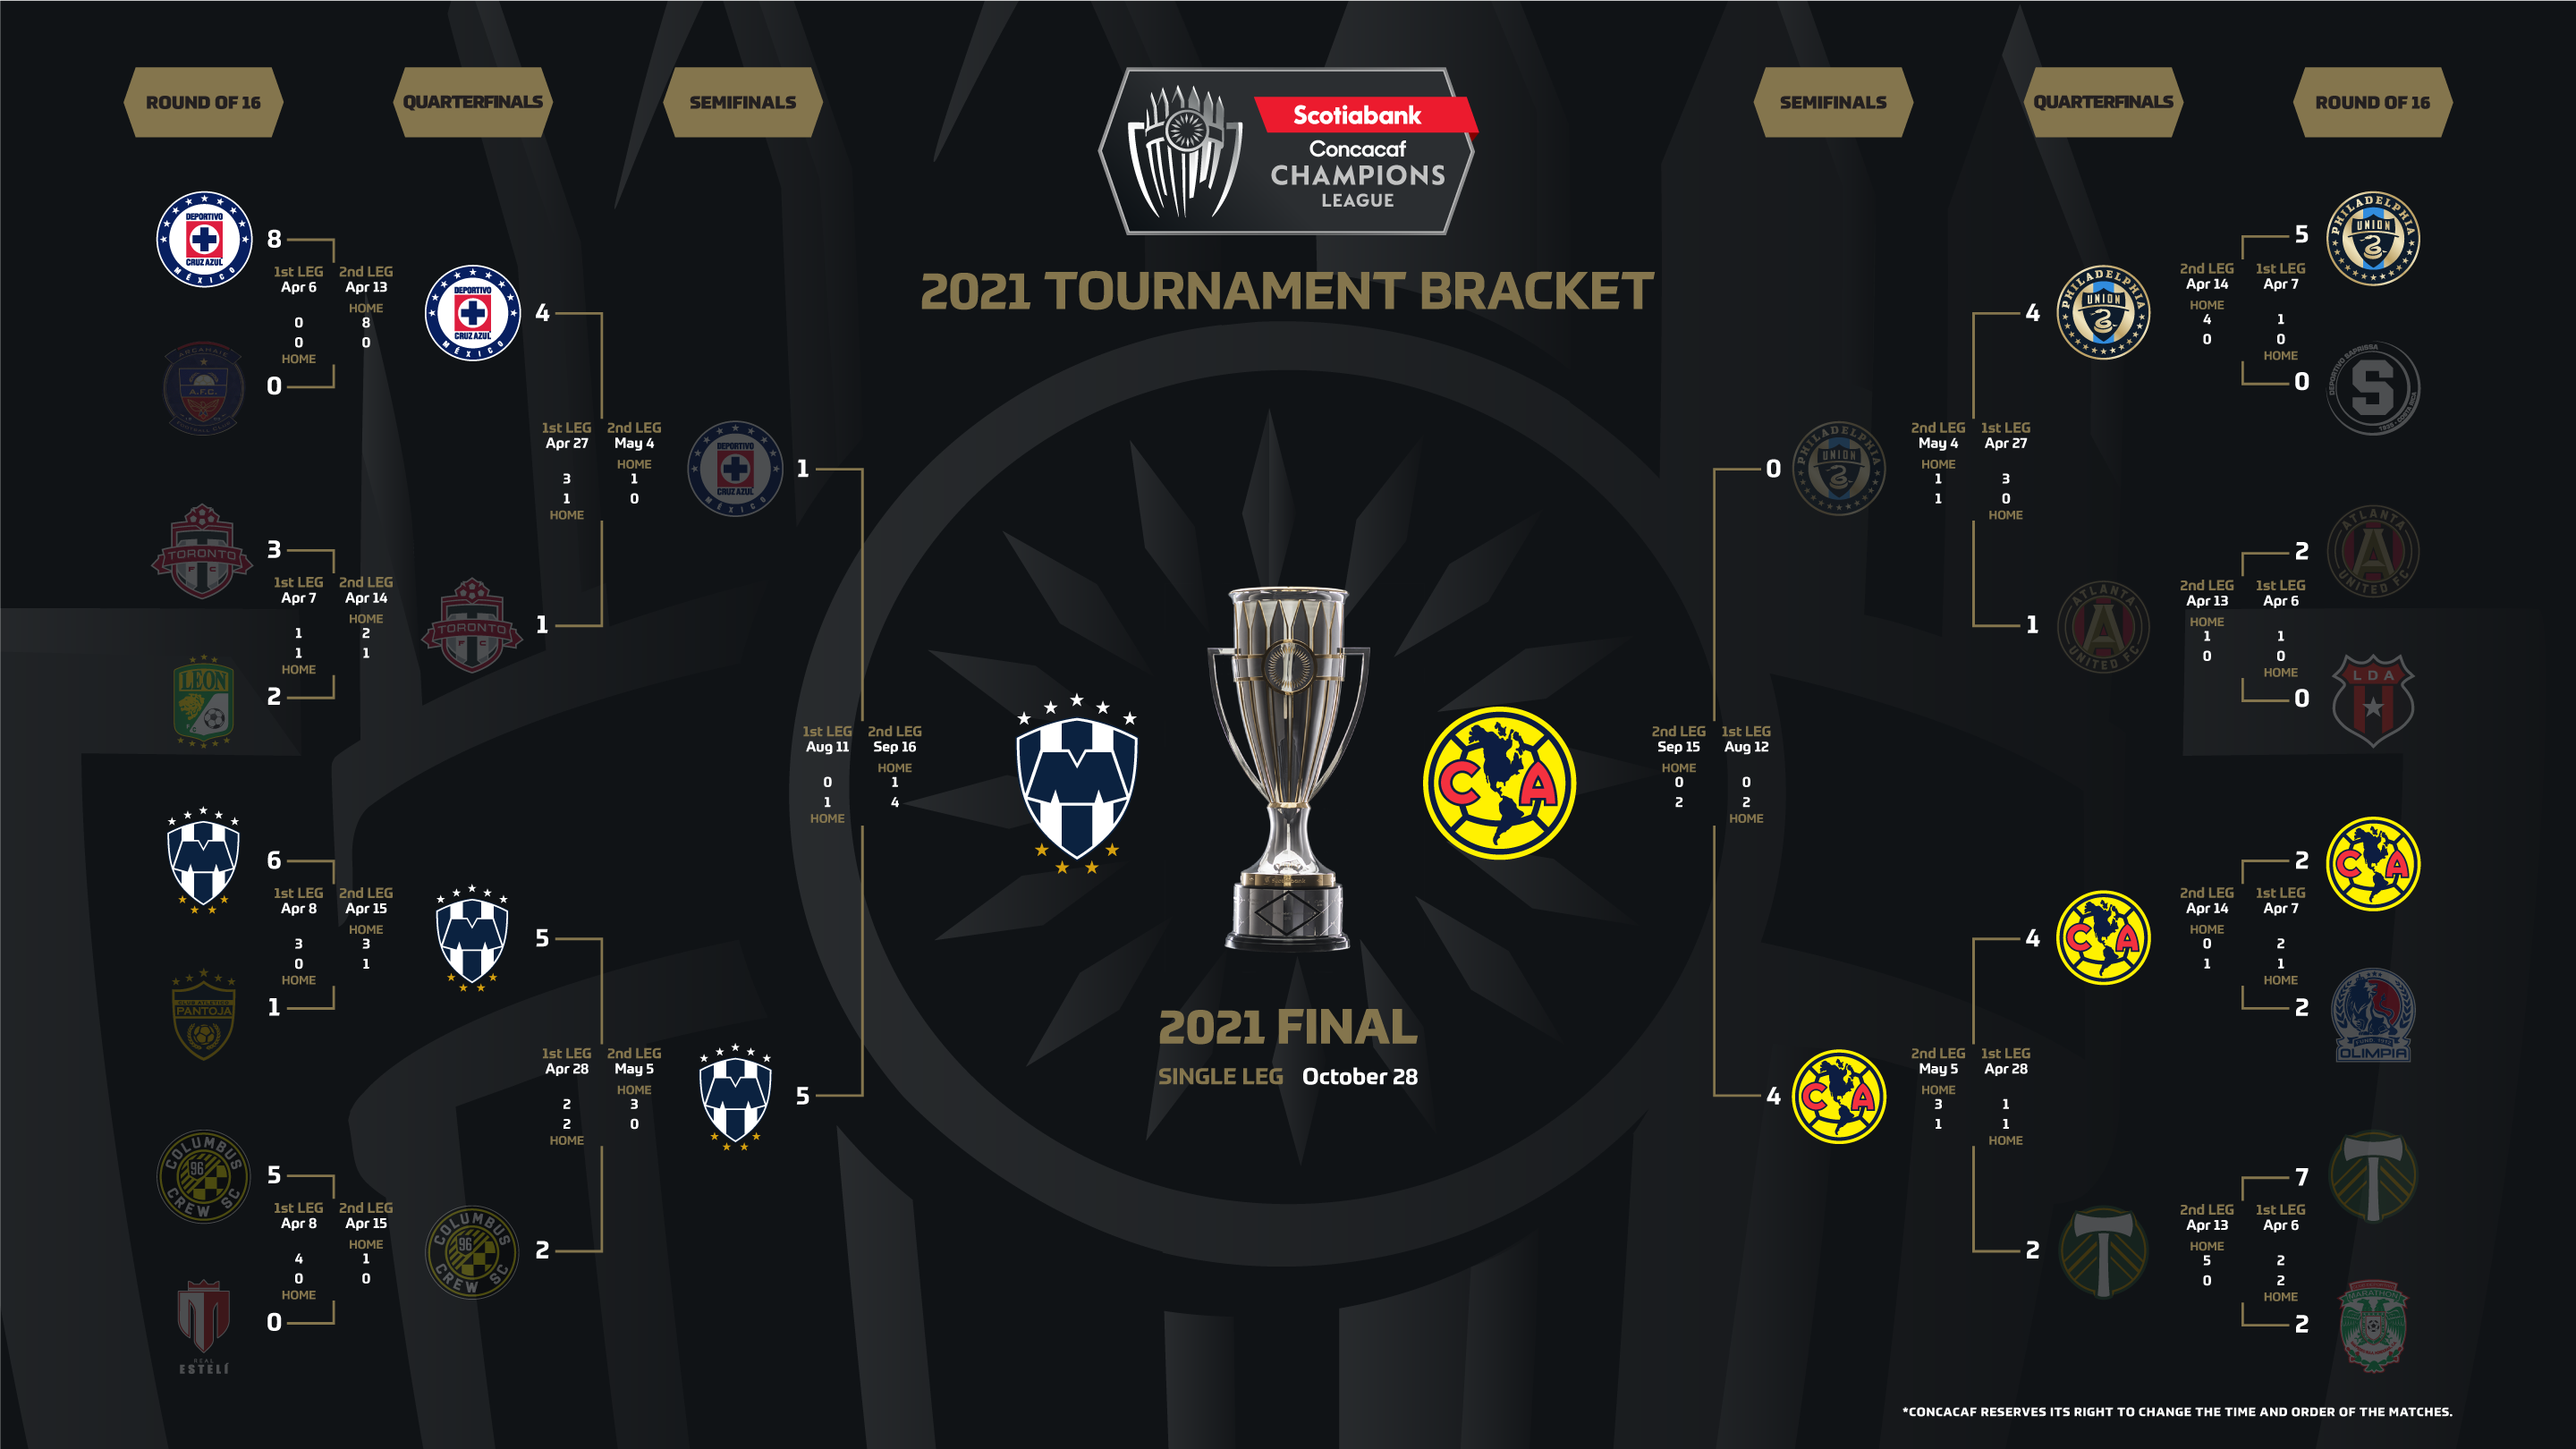 21 Scotiabank Concacaf Champions League Final Between Cf Monterrey And Club America Scheduled For October 28